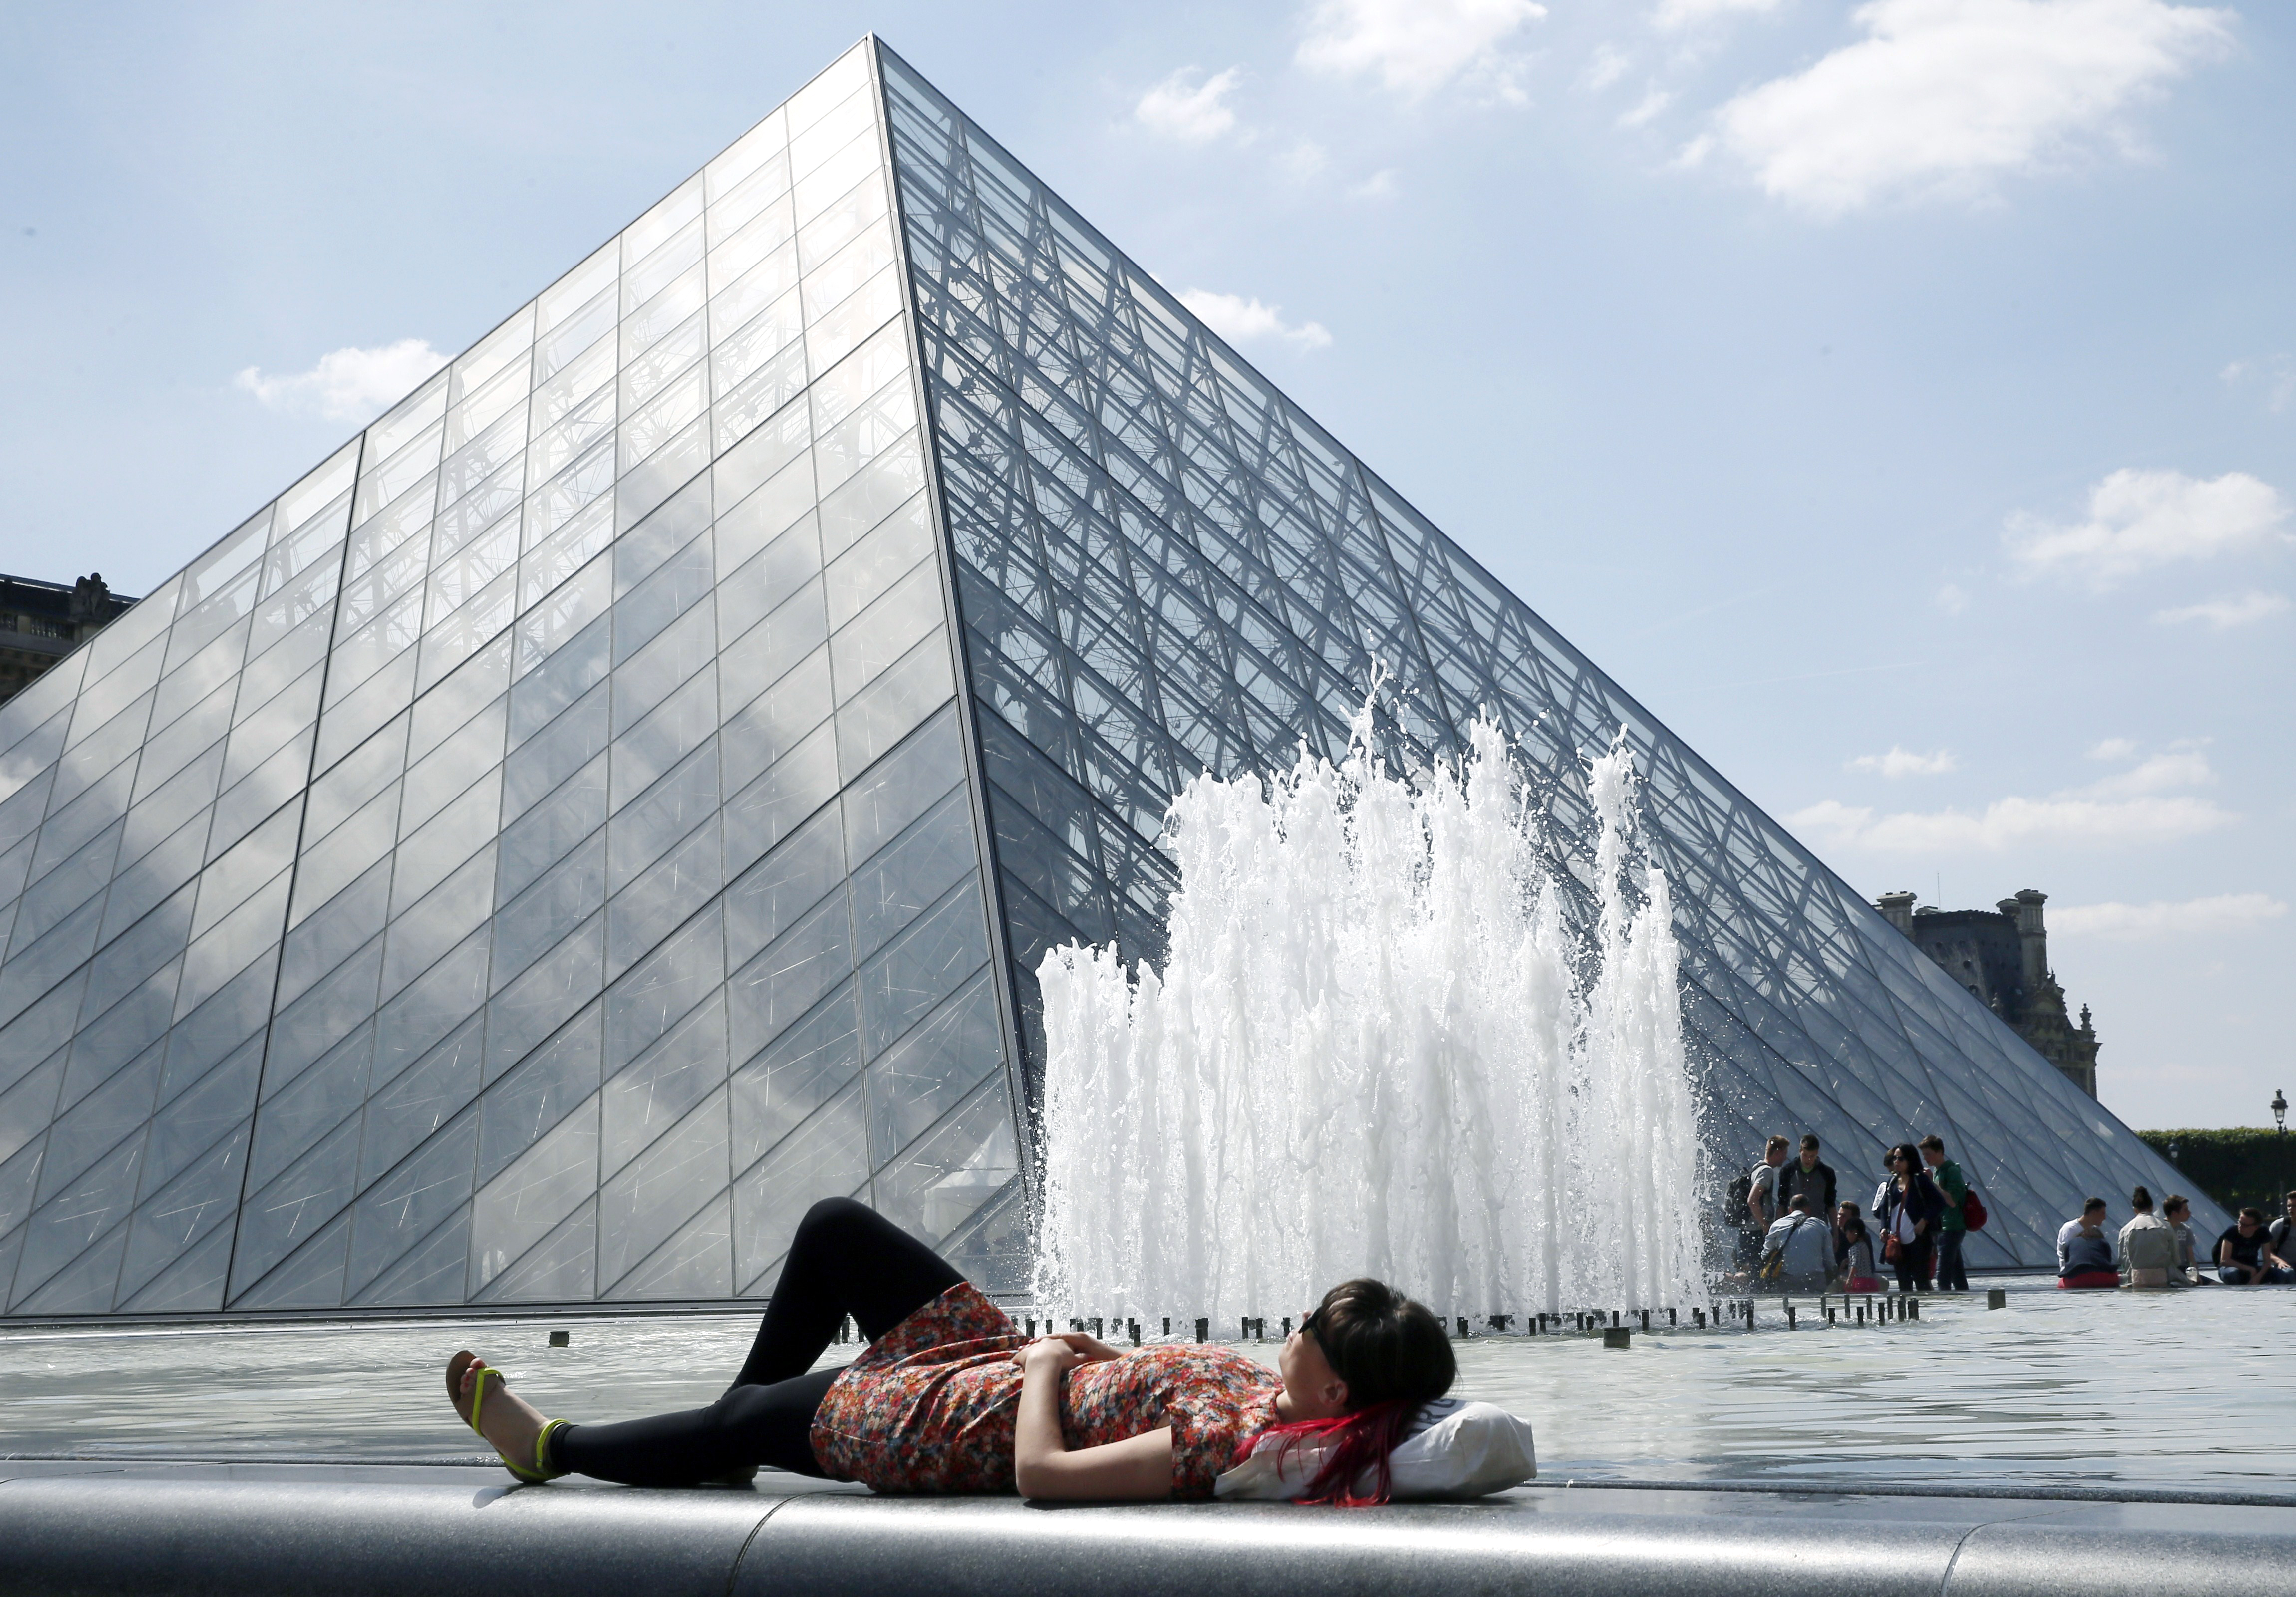 A woman enjoys the sunny weather near the Louvre Museum pyramid in Paris on May 16, 2014. (Patrick Kovarik—AFP/Getty Images)